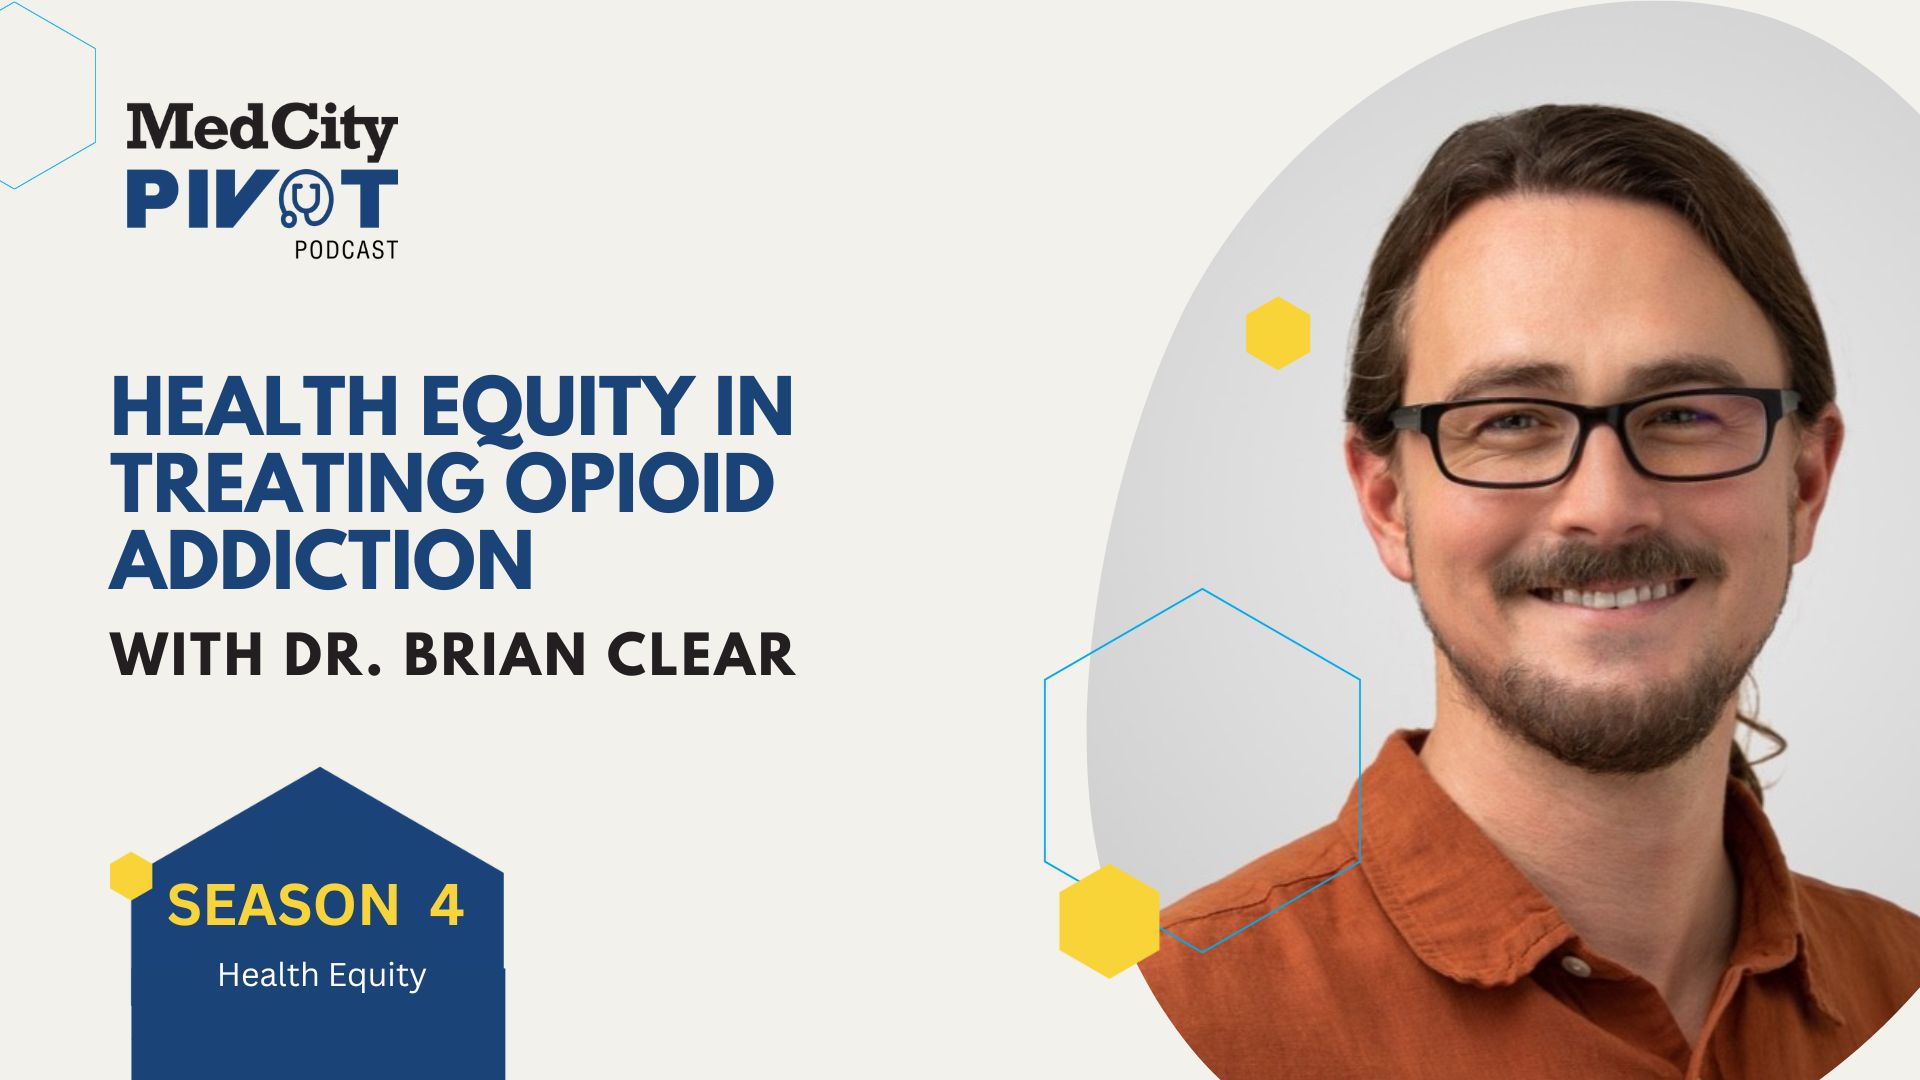 MedCity Pivot Podcast: Health Equity in Opioid Addiction Treatment With Dr. Brian Clear - MedCity News